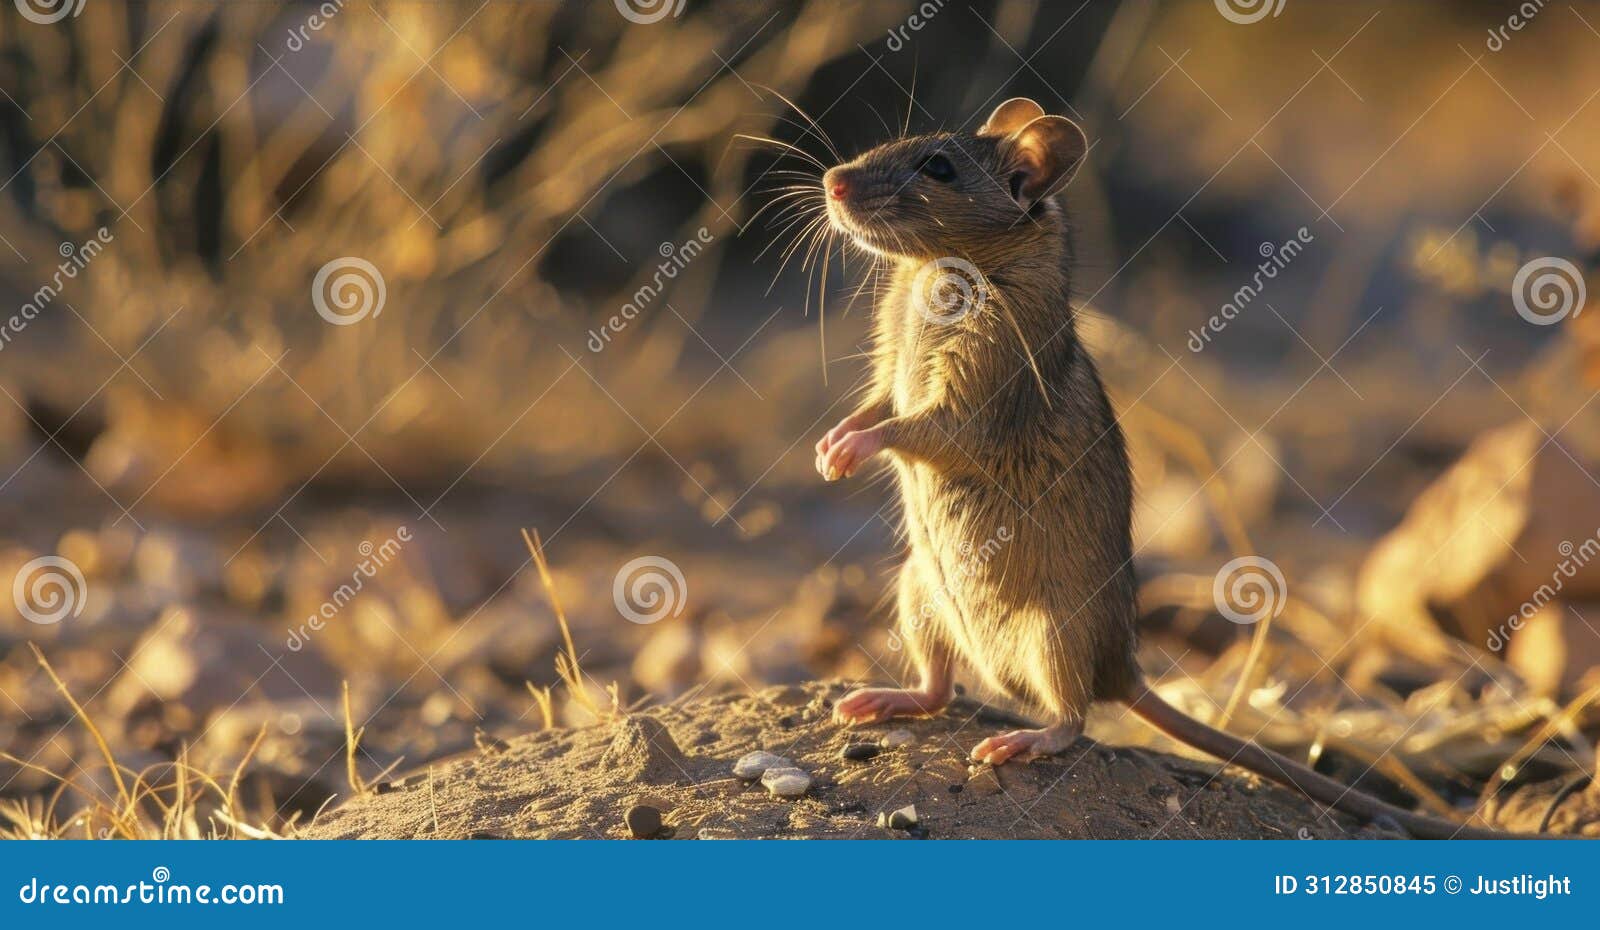 a scavenging rat standing on its hind legs determined to survive and find sustenance amidst the drought